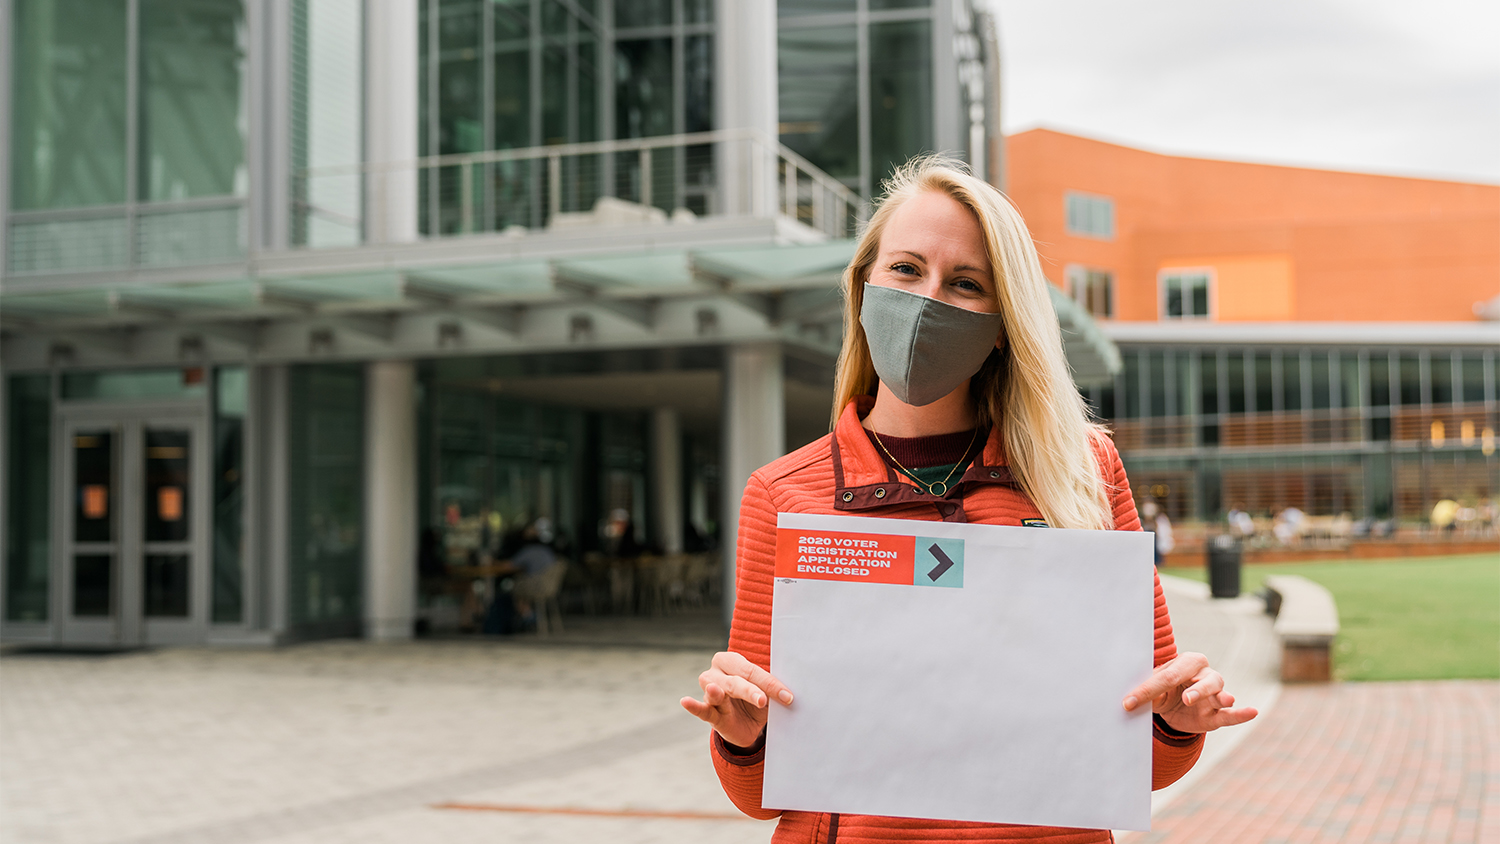 A student in front of Talley Student Union holds an envelope labeled "2020 voter registration application enclosed"